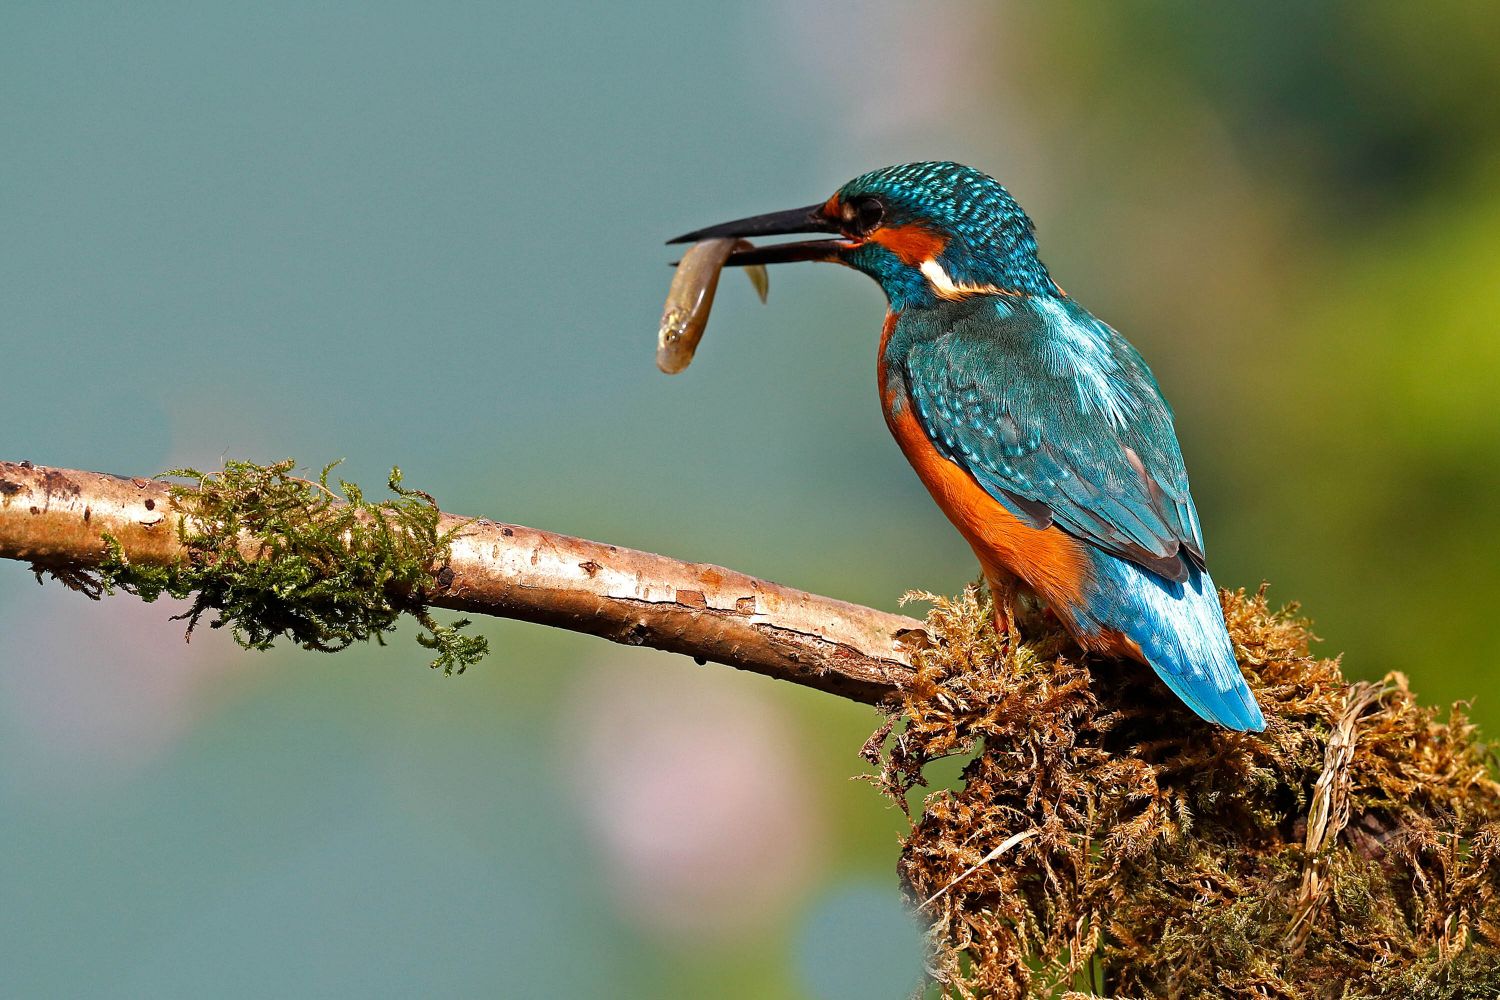 Kingfisher catching fish sitting on a perch with a fish in its mouth